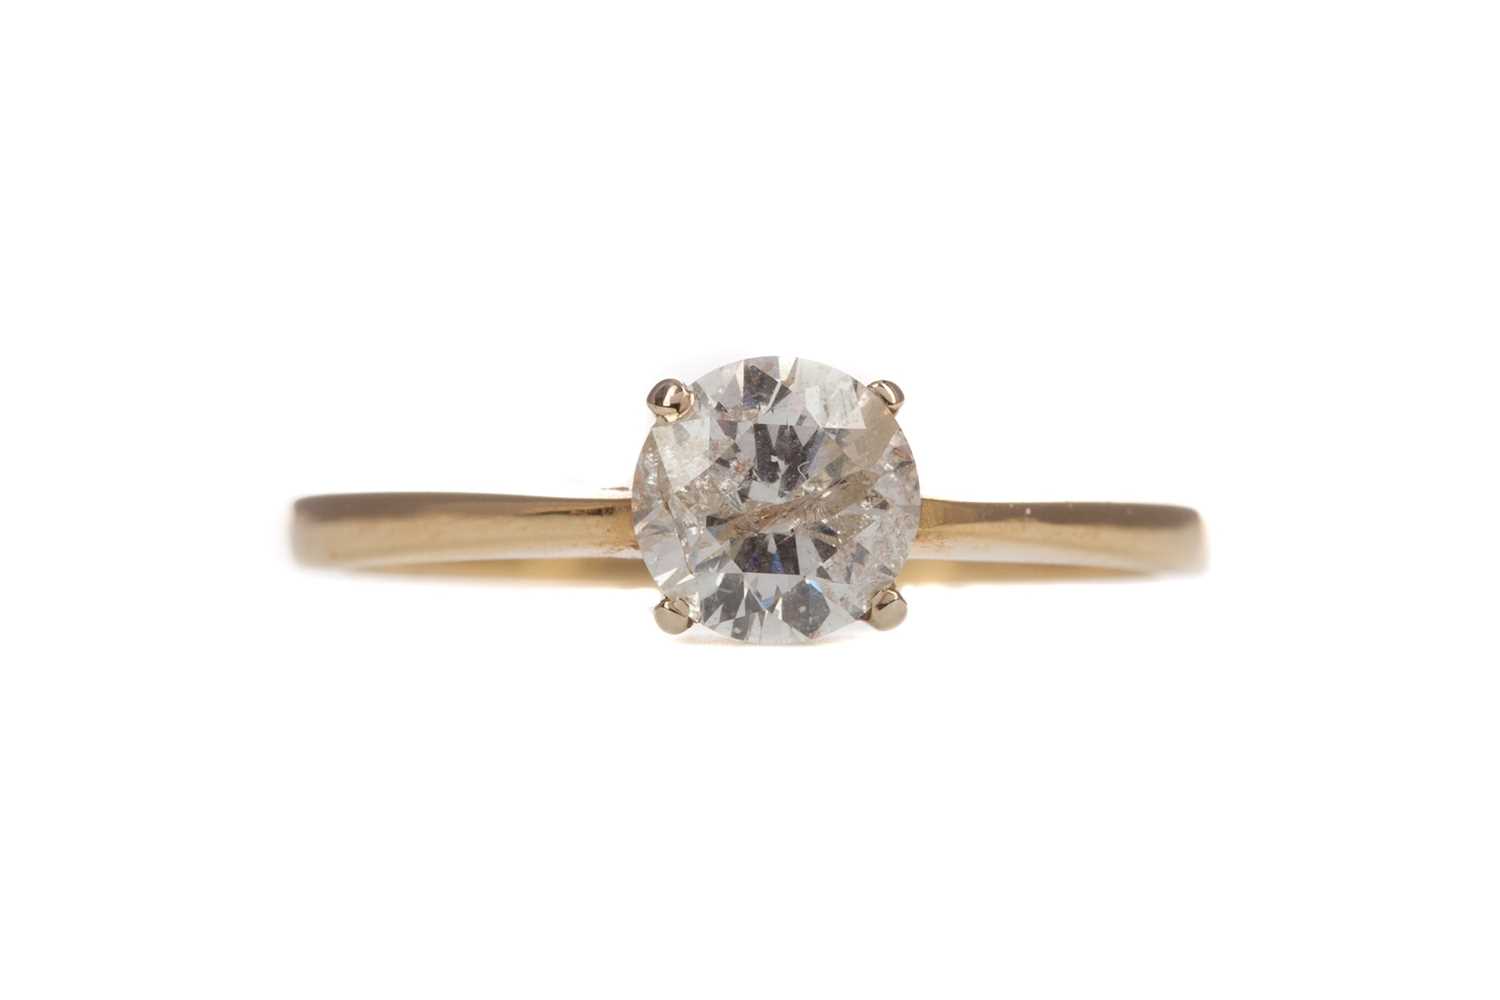 Lot 310 - A DIAMOND SOLITAIRE RING